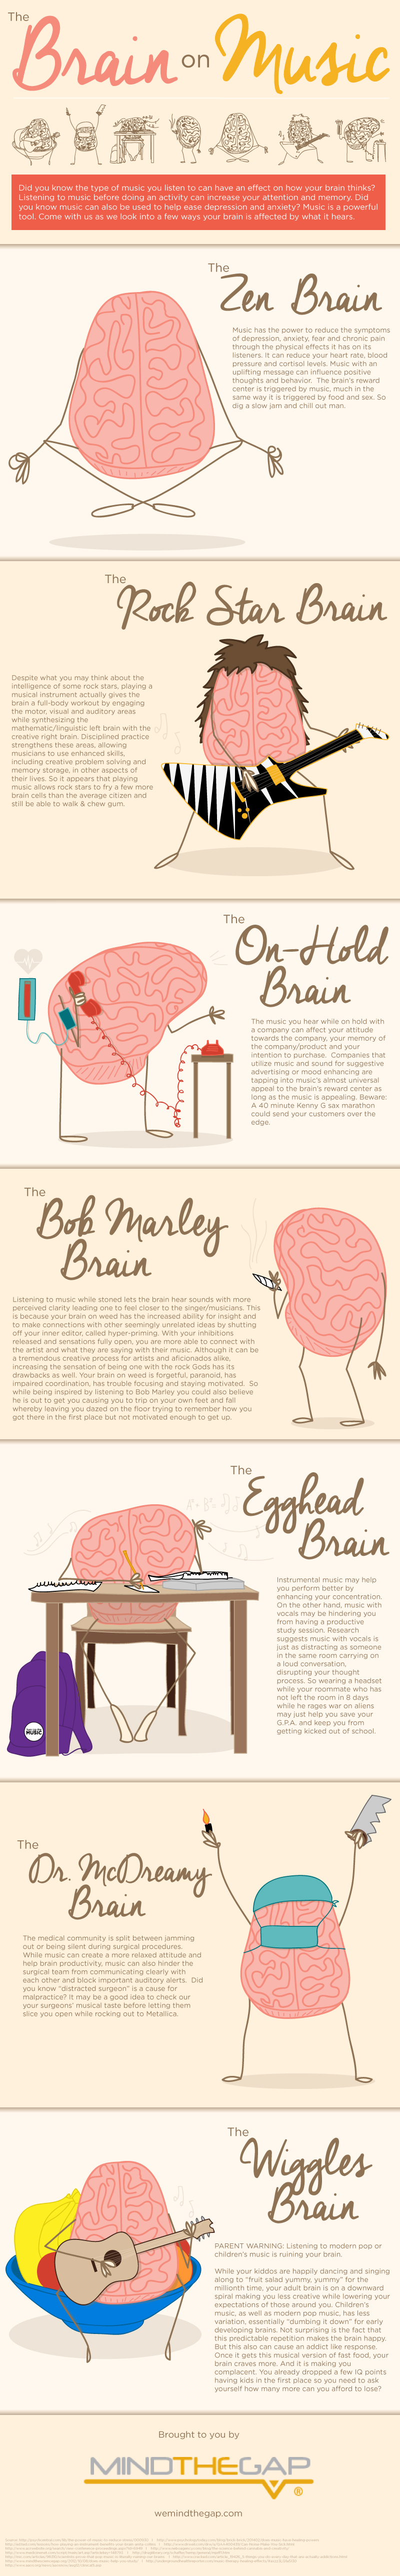 Your Brain On Music